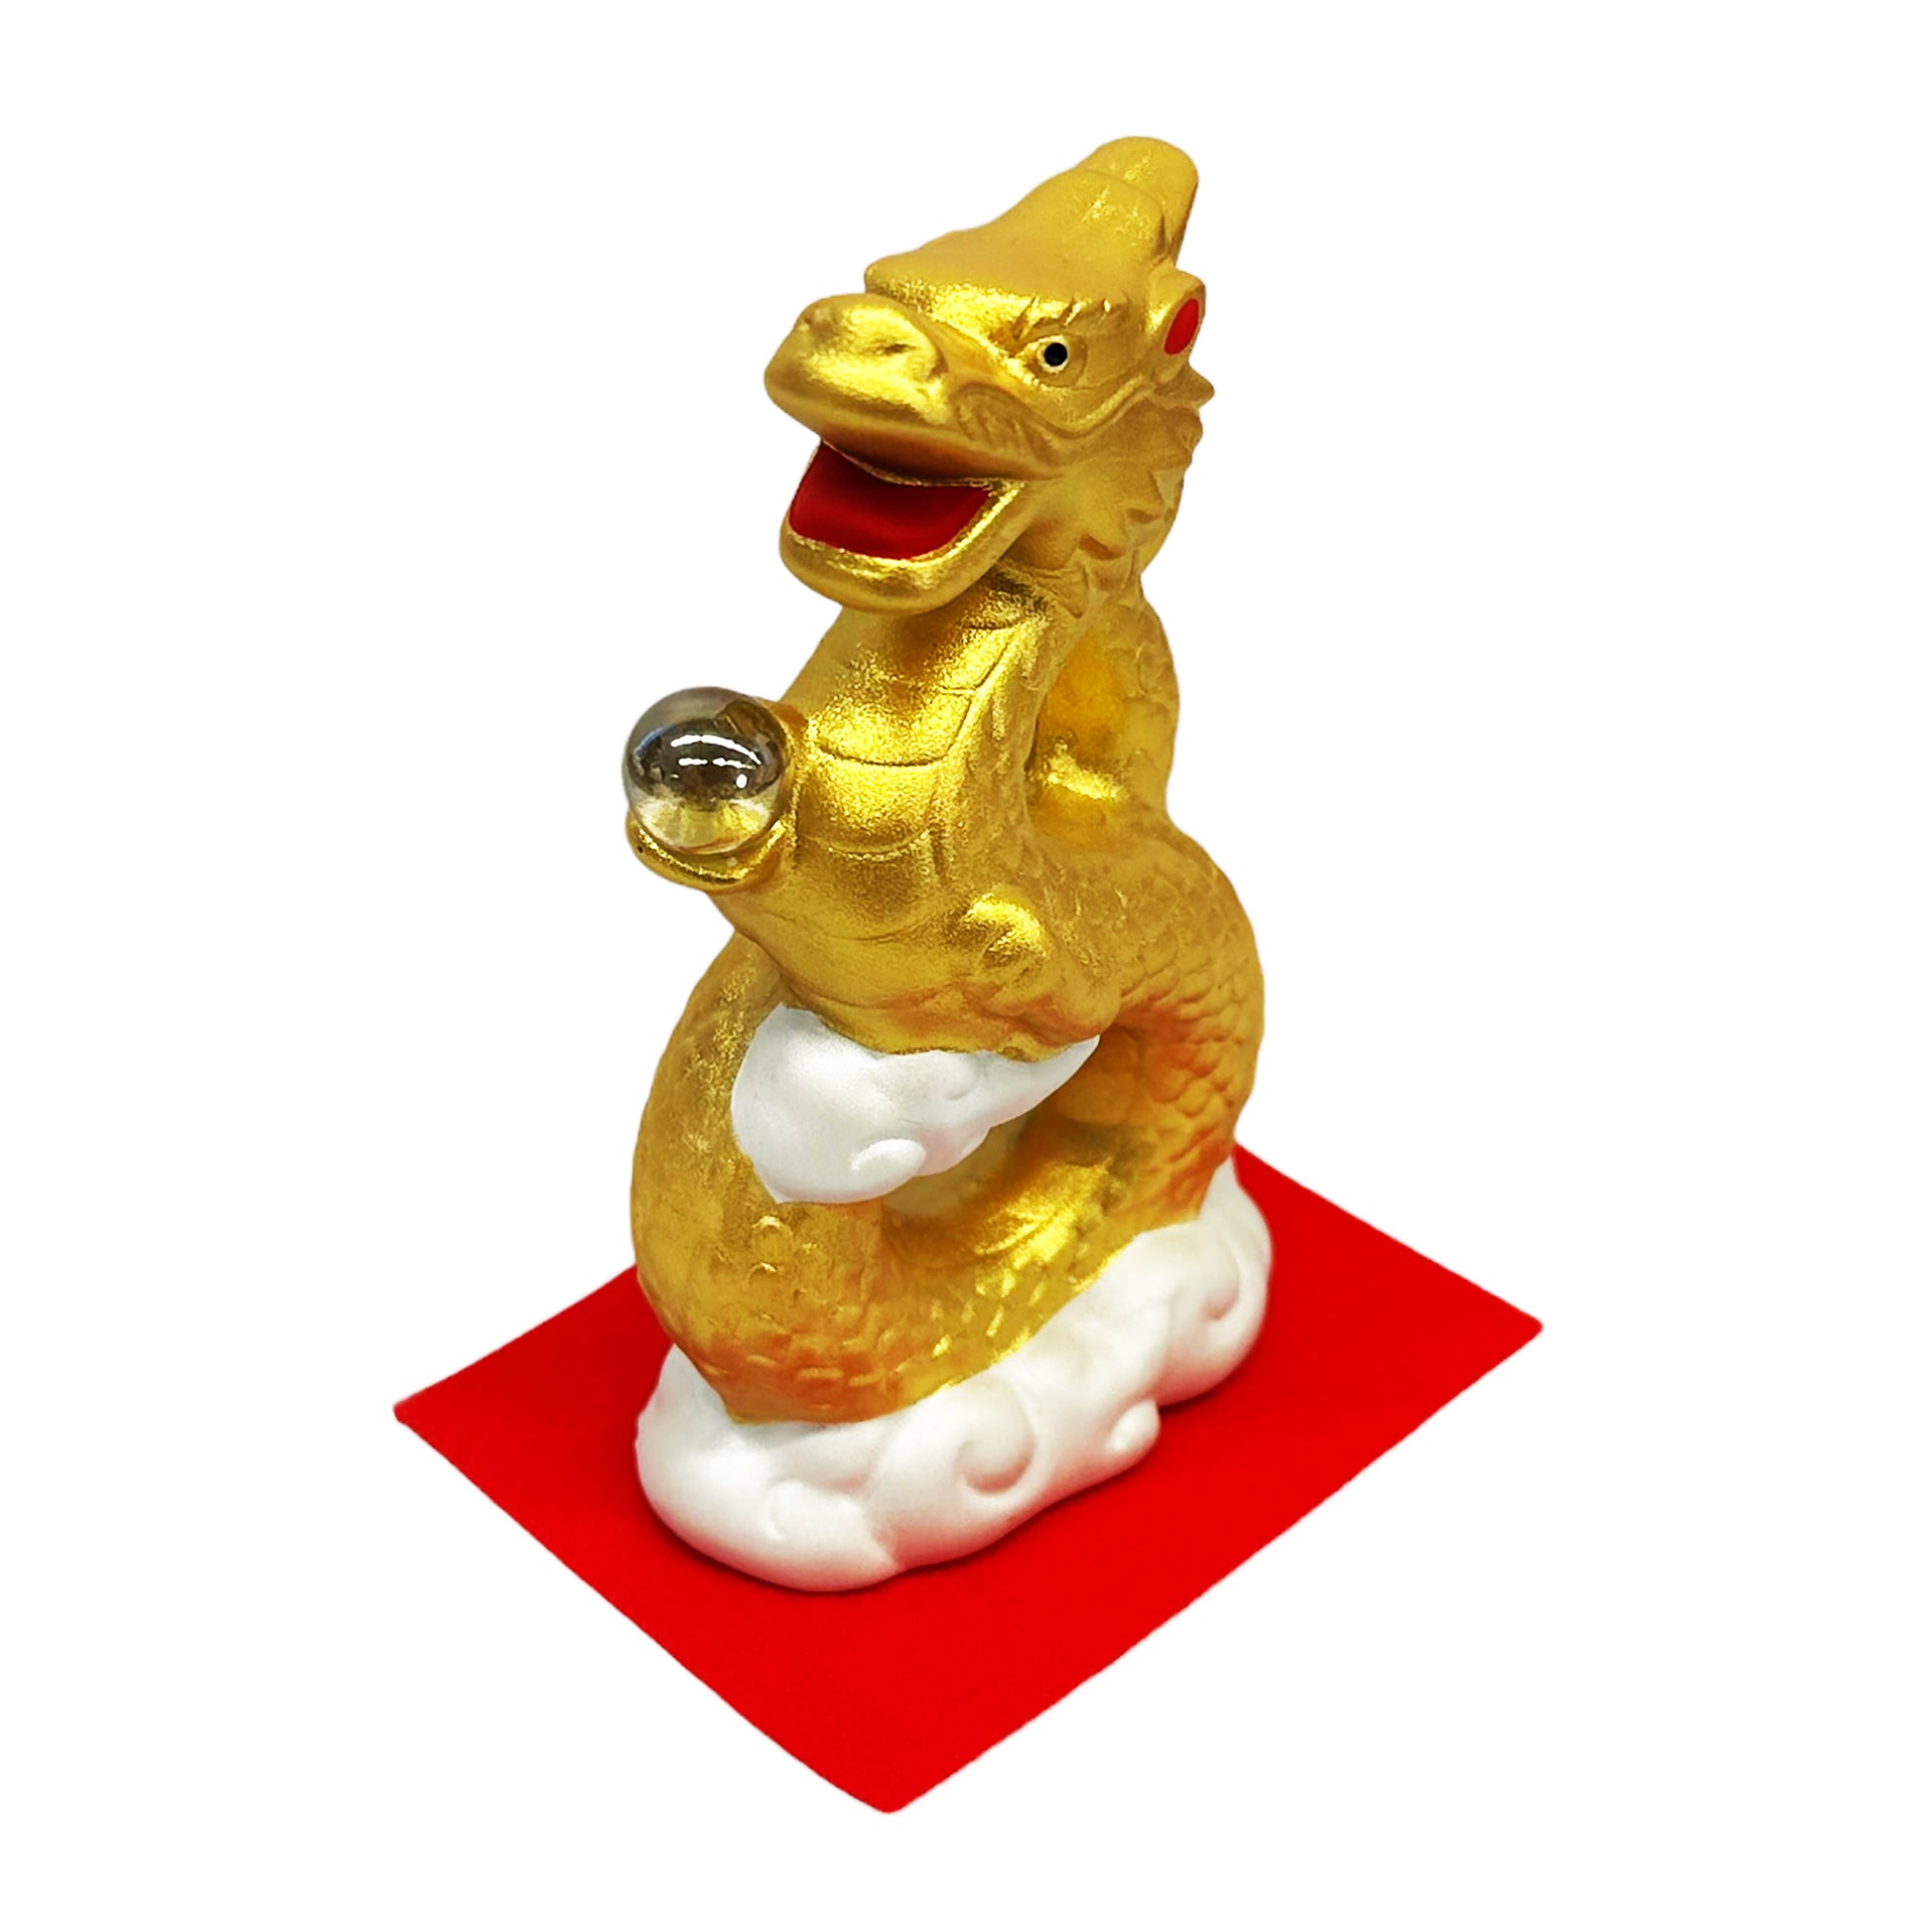 Side graphic image of Golden Dragon Ornament Figurine 4 X 2.5 X 1.5 Inches